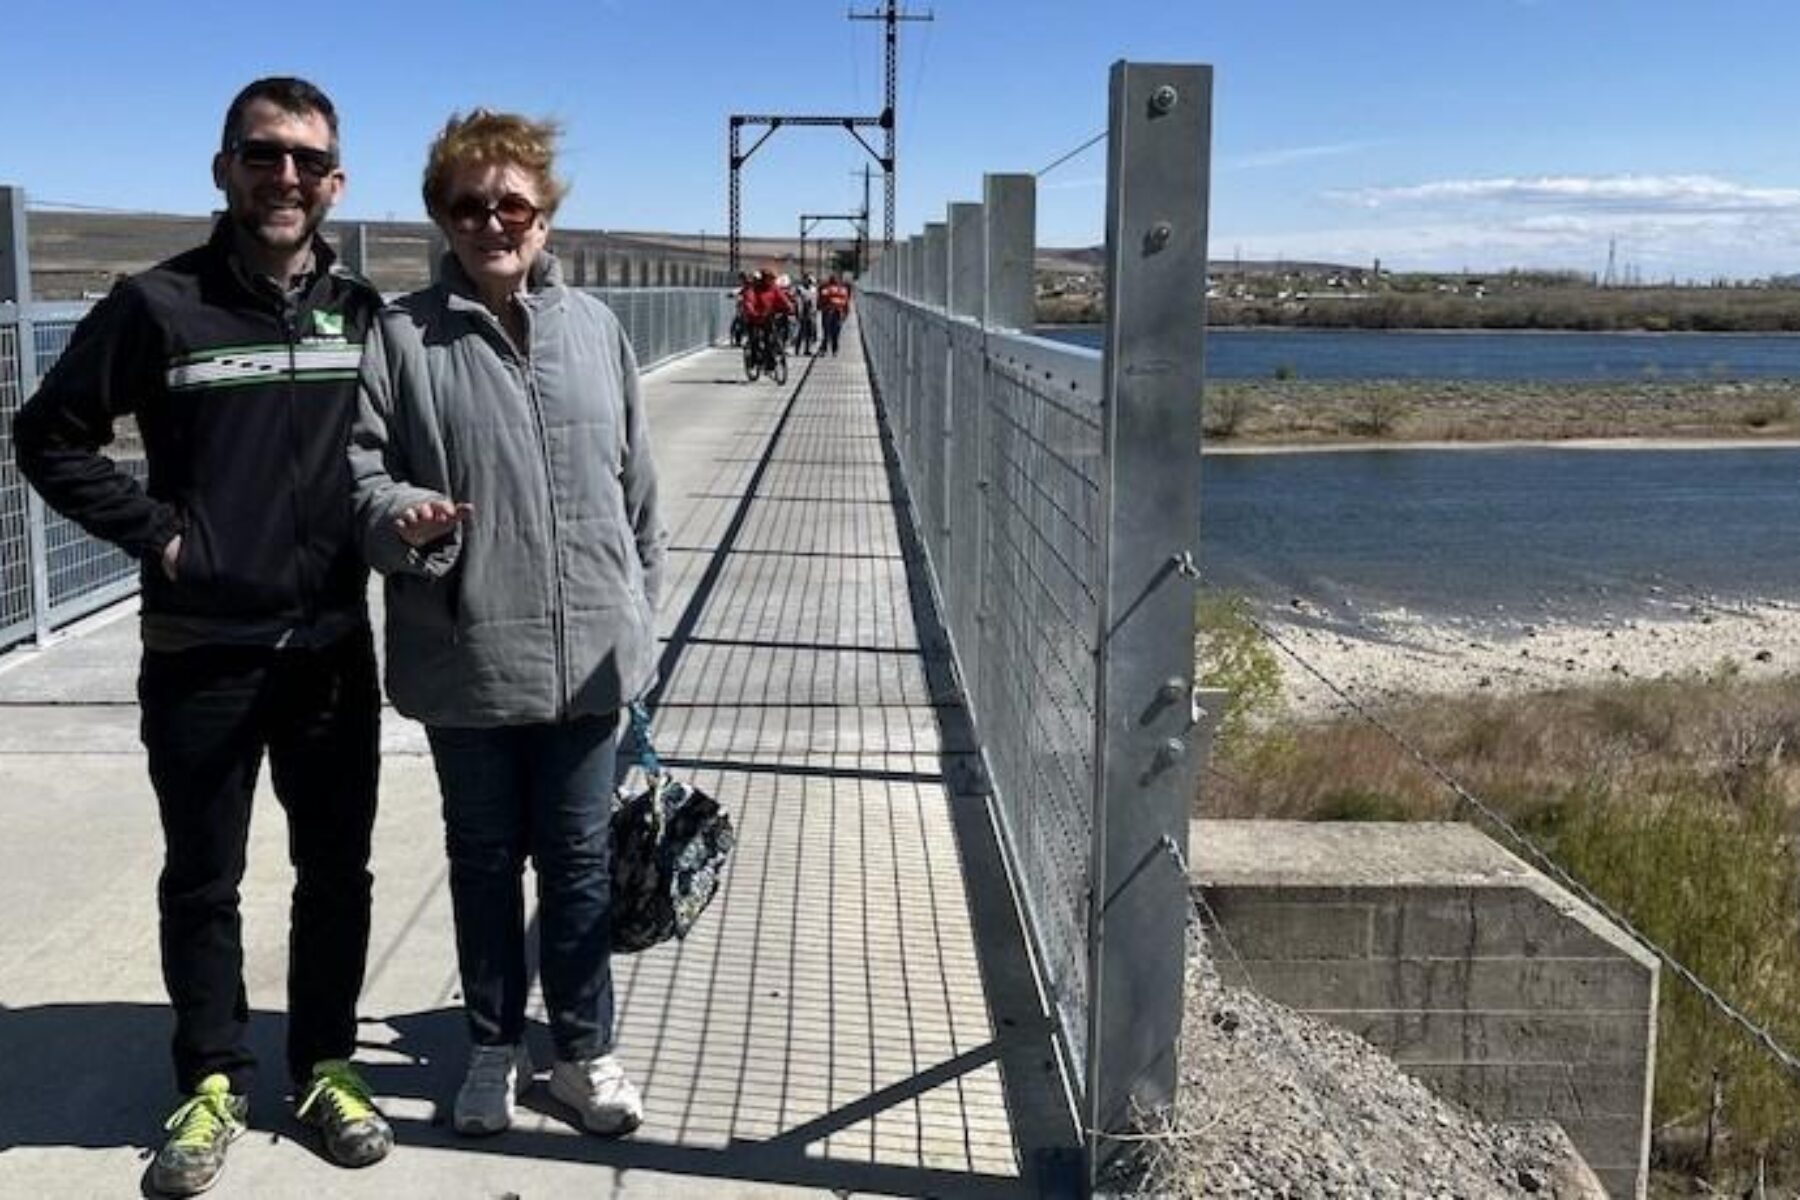 Rails-to-Trails staffers Kevin Belle and Marianne Wesley Fowler at the opening of the Beverly Bridge along the Palouse to Cascades State Park Trail in Washington | Courtesy Kevin Belanger